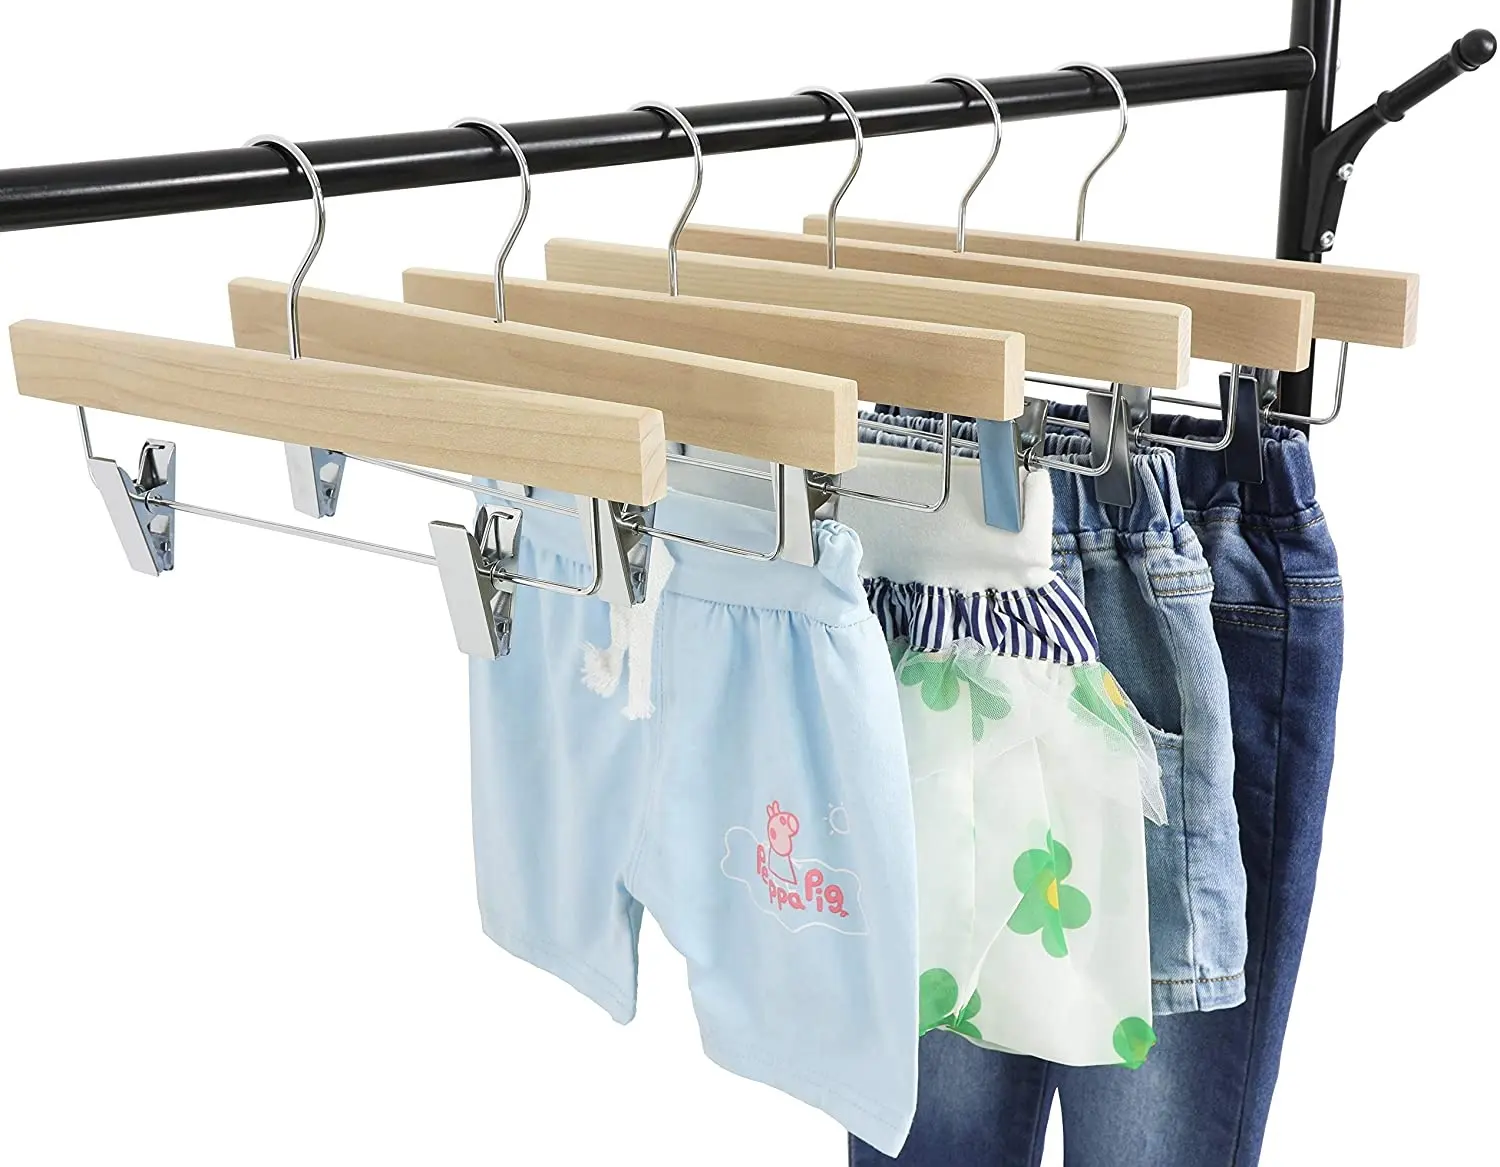 Natural Wooden Pants Skirt Hangers for Kids Baby Toddler Children Clothes hangers with Extra Thick Chrome Clips